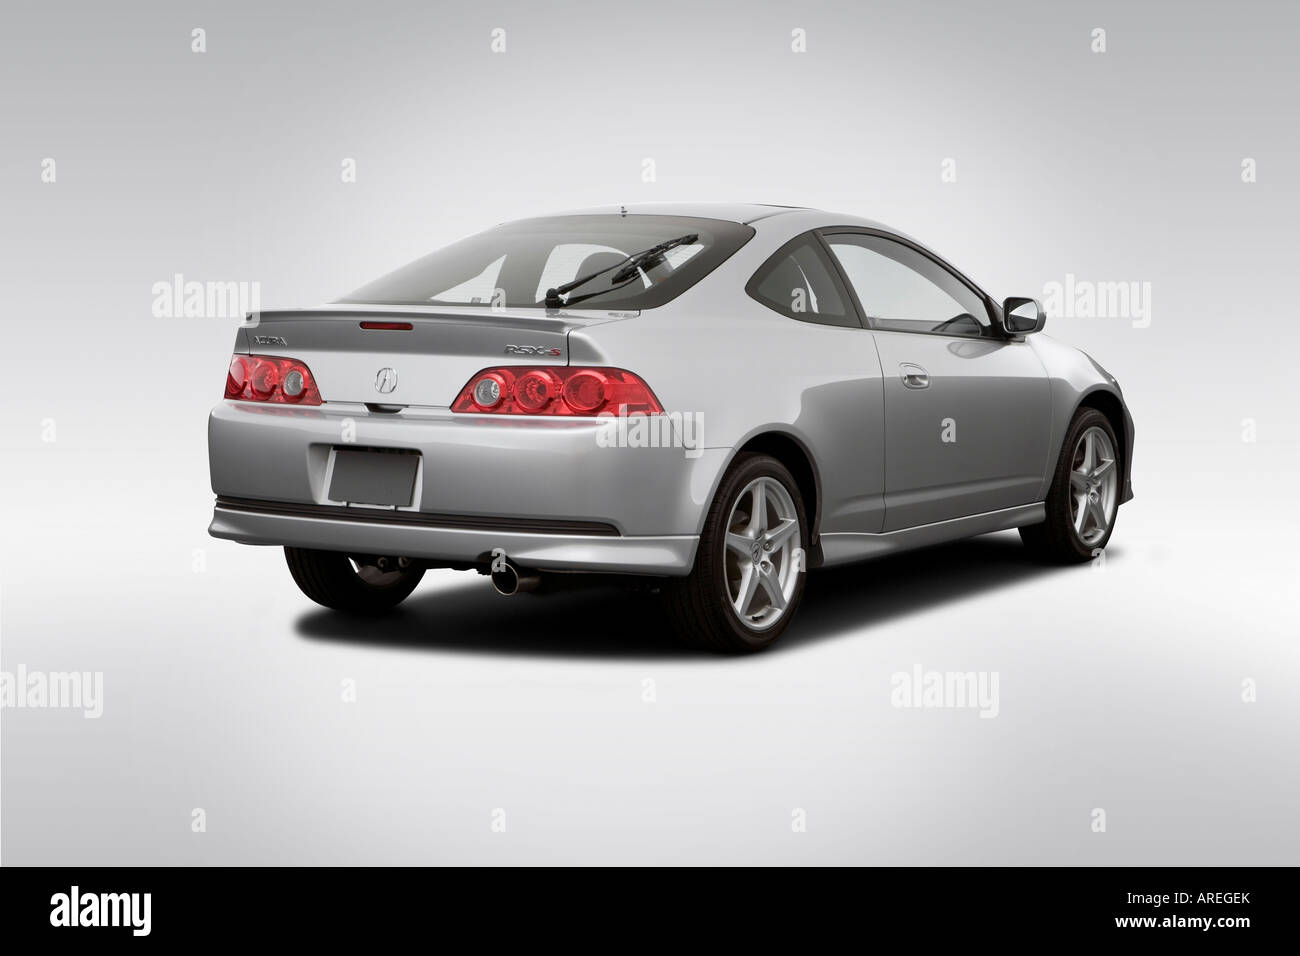 2006 Acura RSX Type-S in Silver - Rear angle view Stock Photo - Alamy